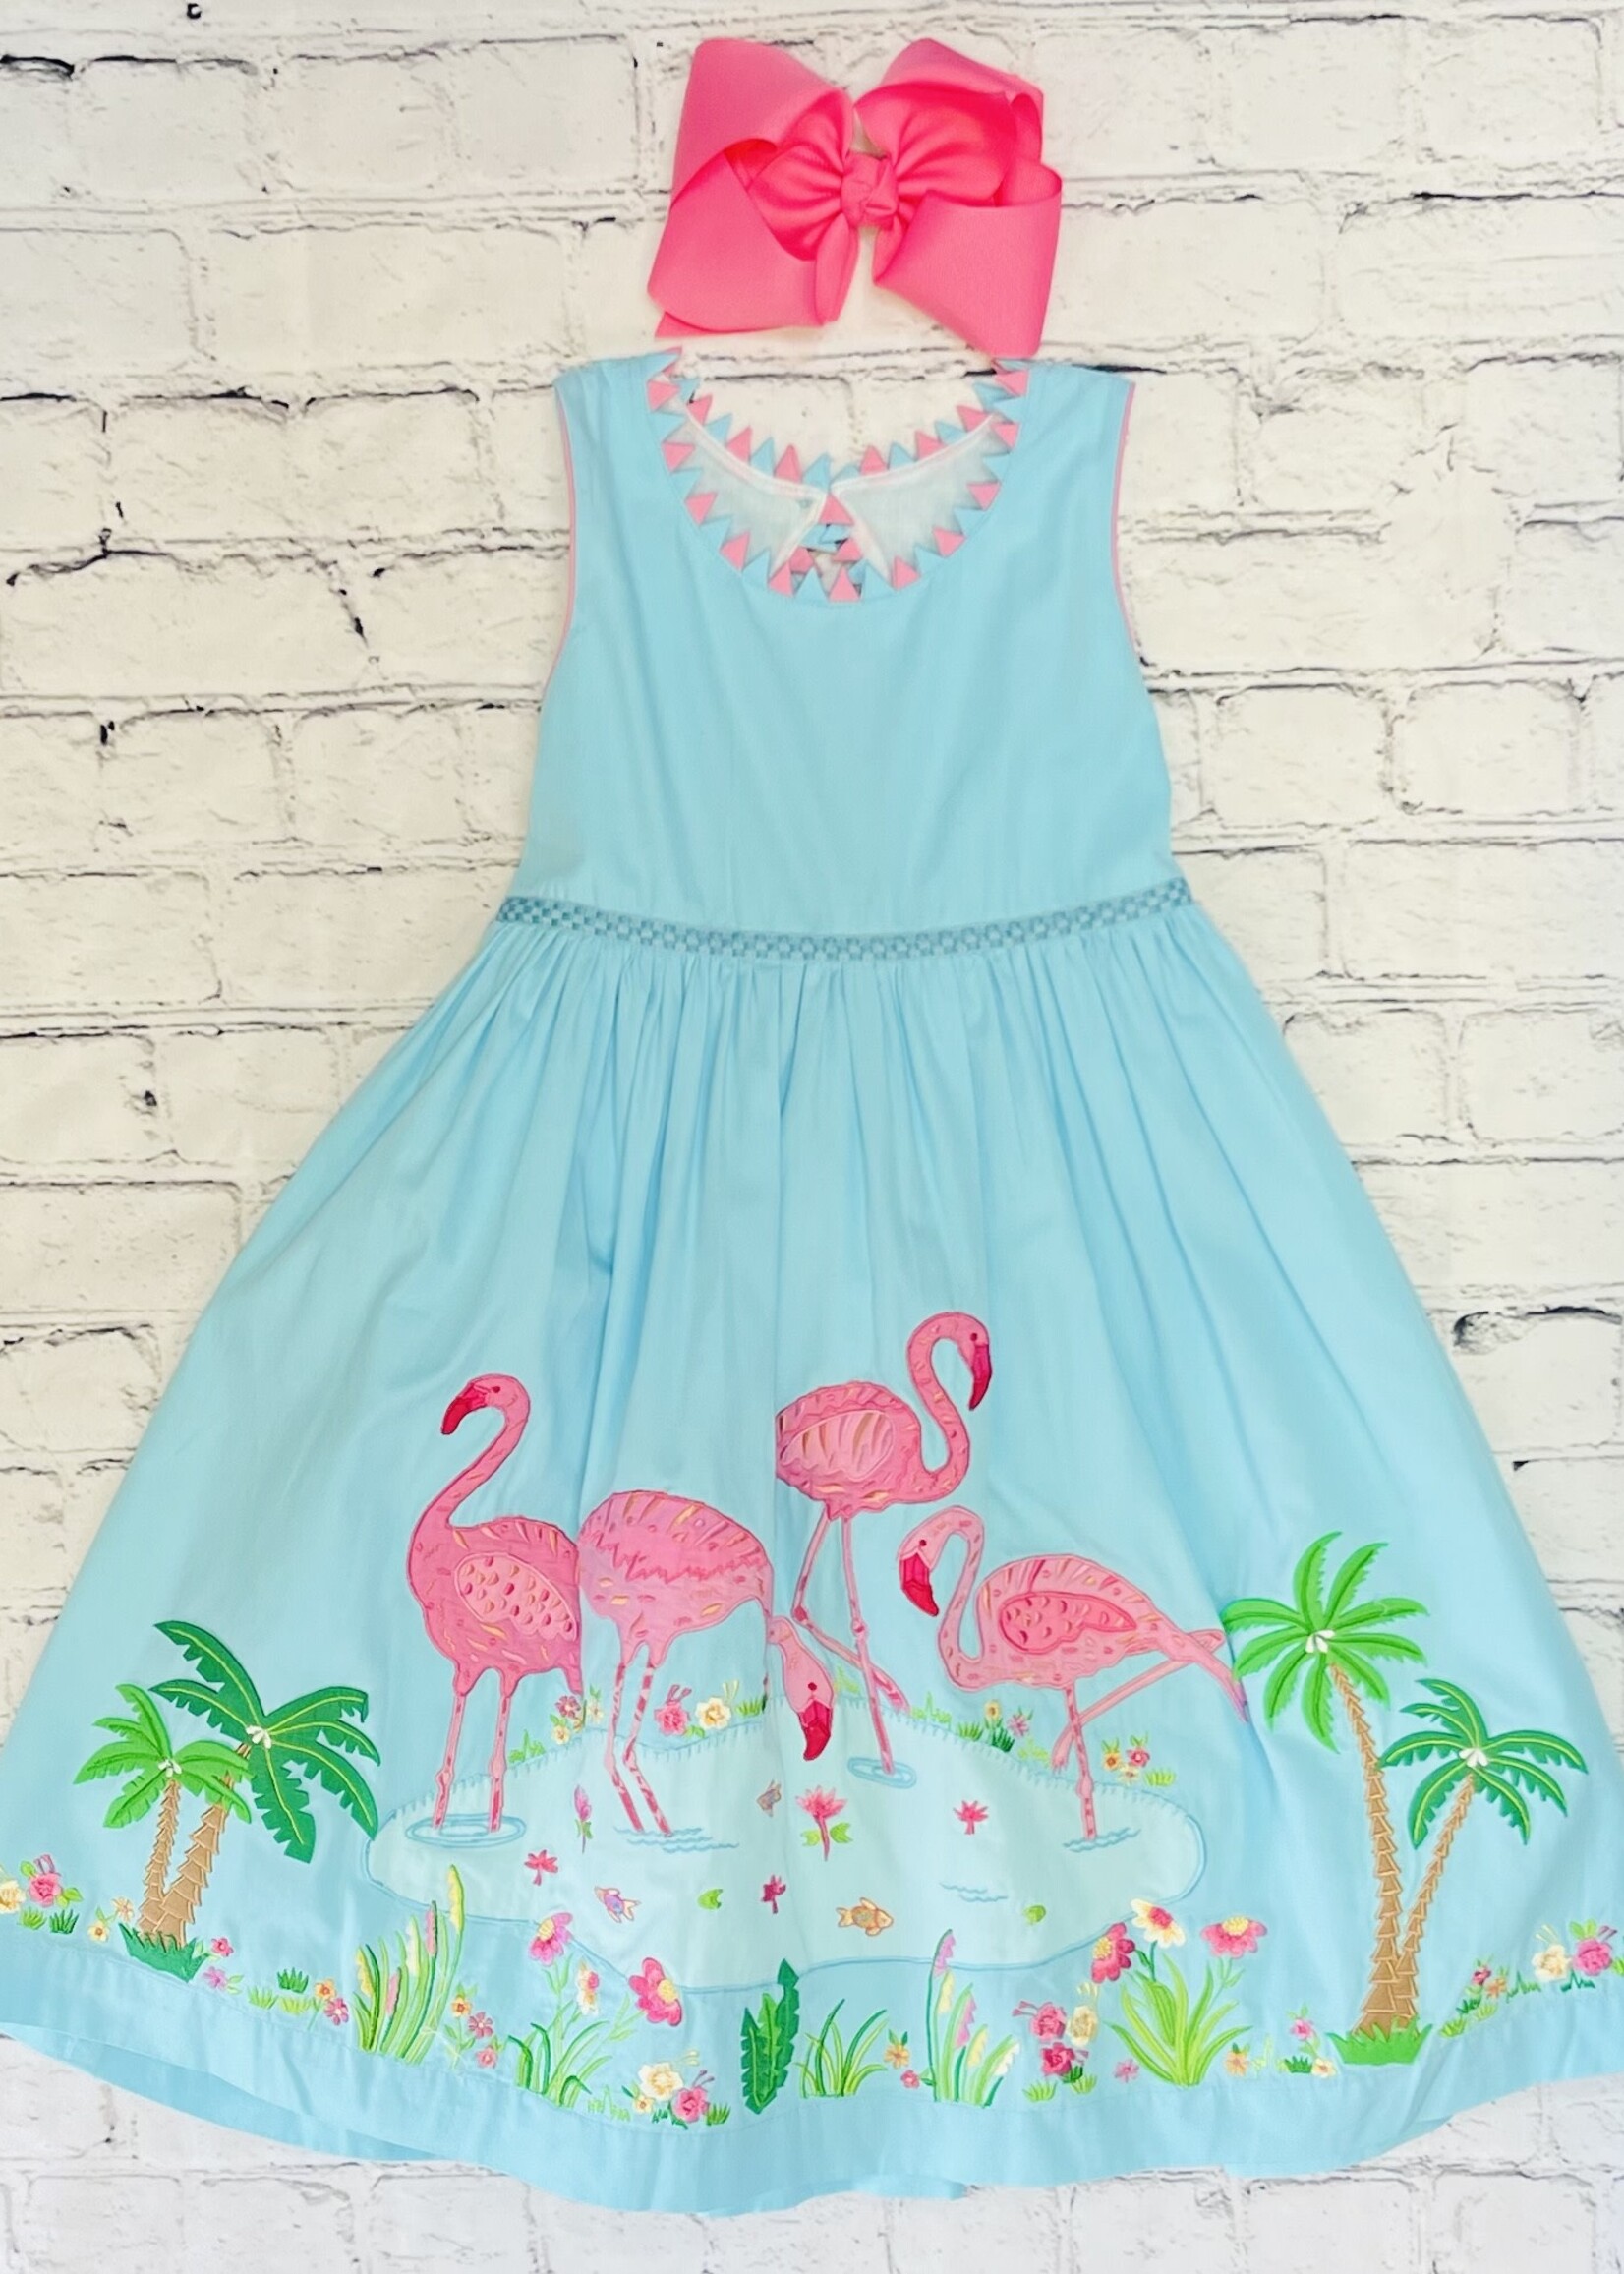 Flamingo Embroidered Dress-CK4746(S'24)